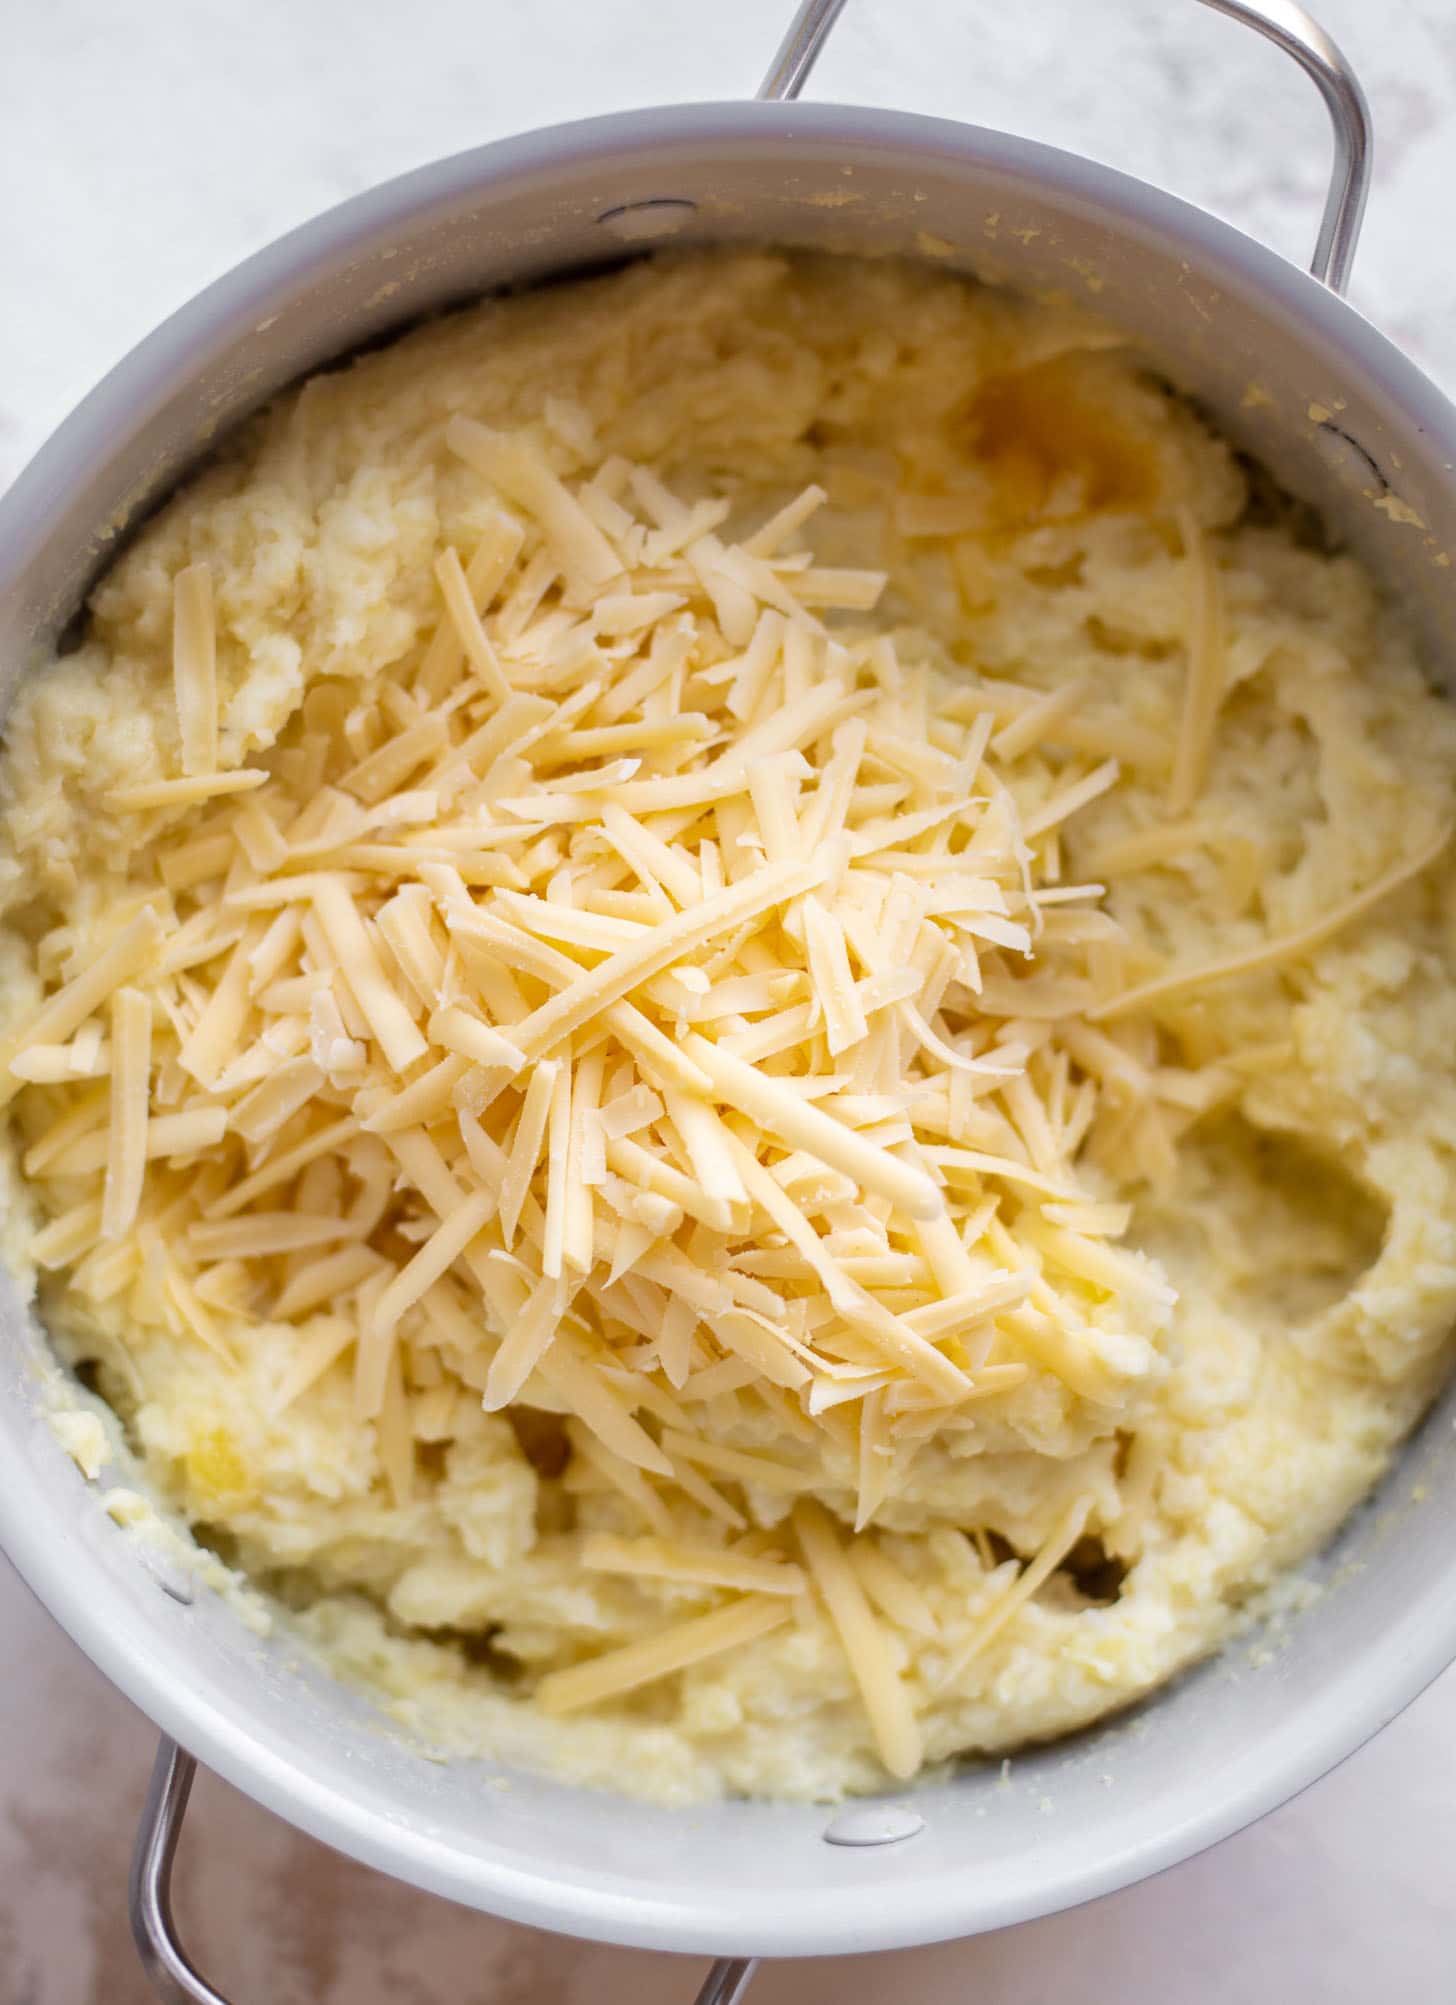 mashed potatoes with gruyere cheese